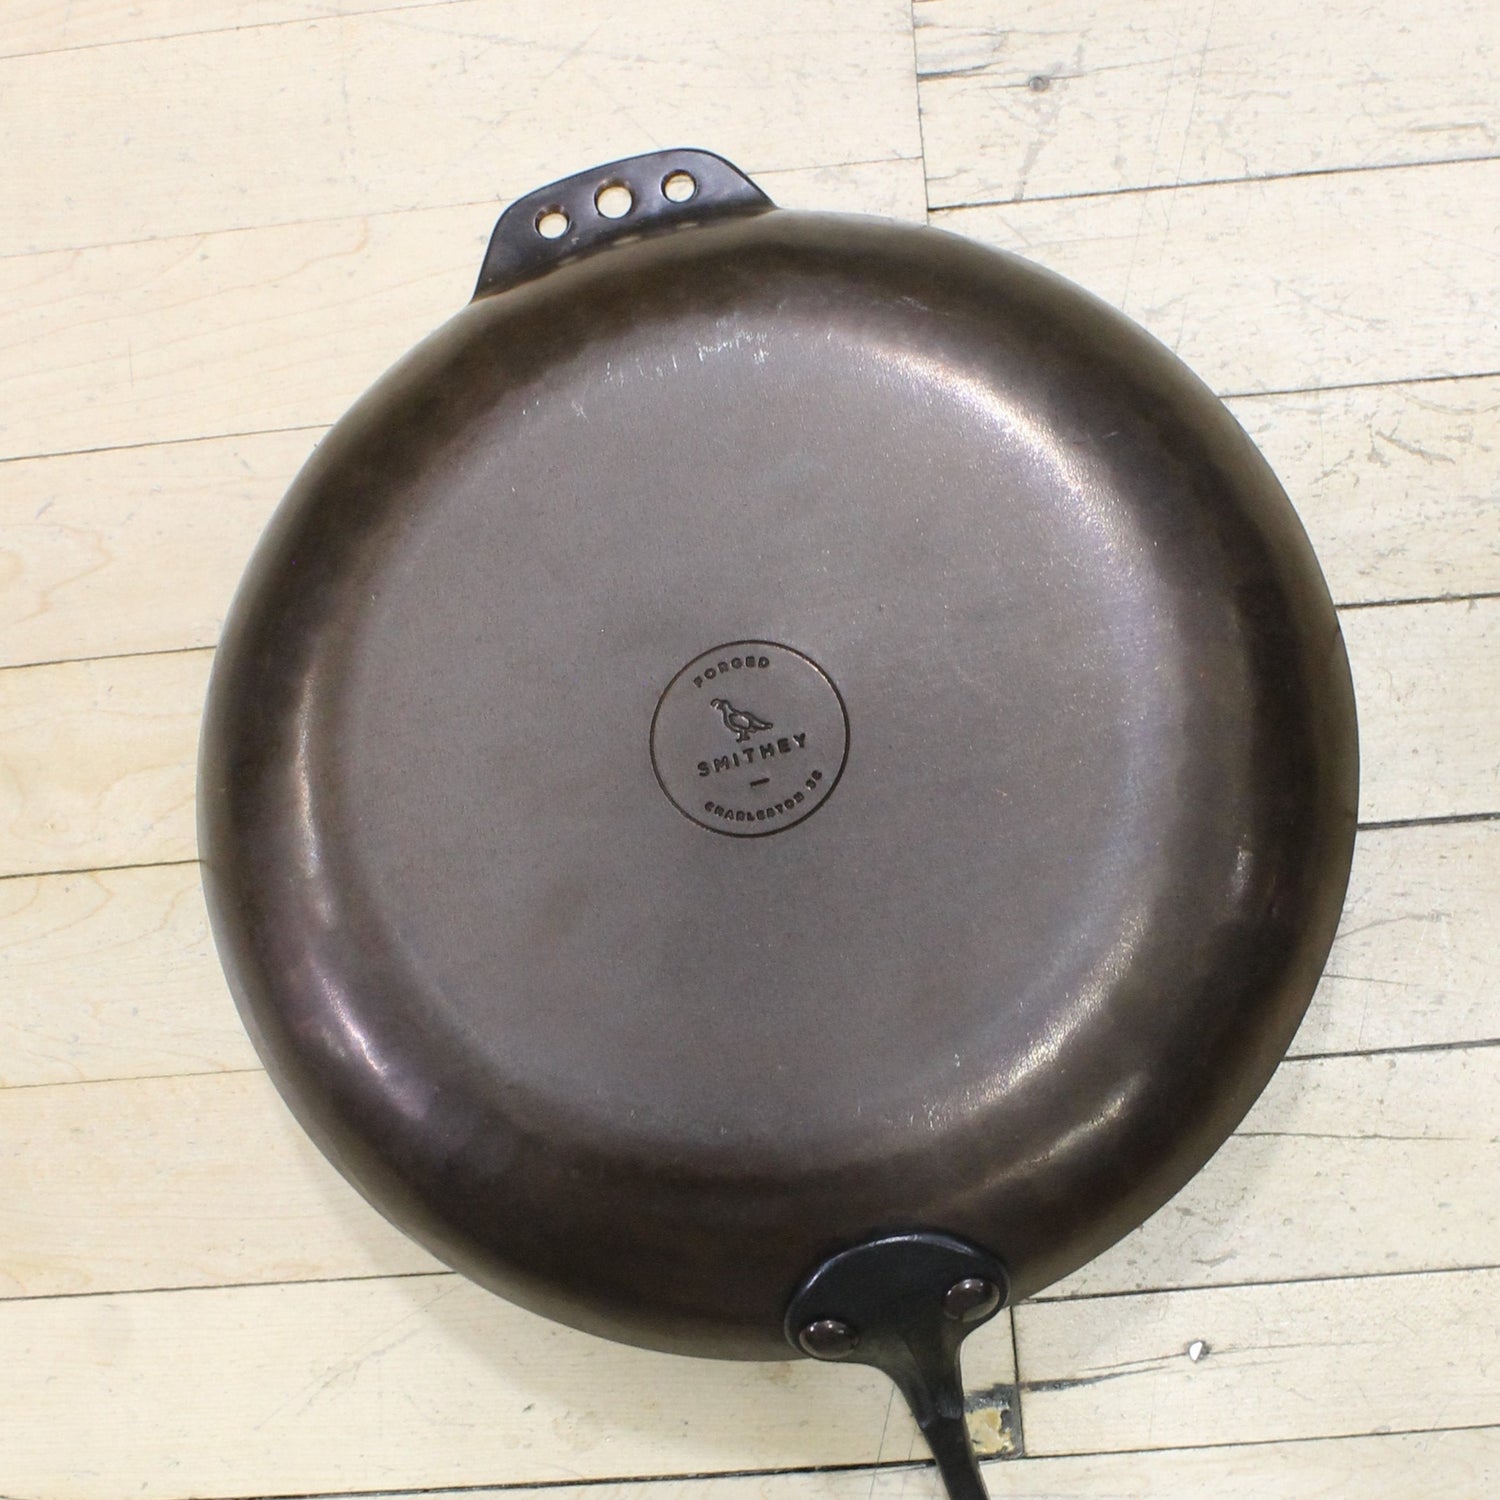 Smithey 12in Carbon Steel Farmhouse Skillet view of bottom of skillet